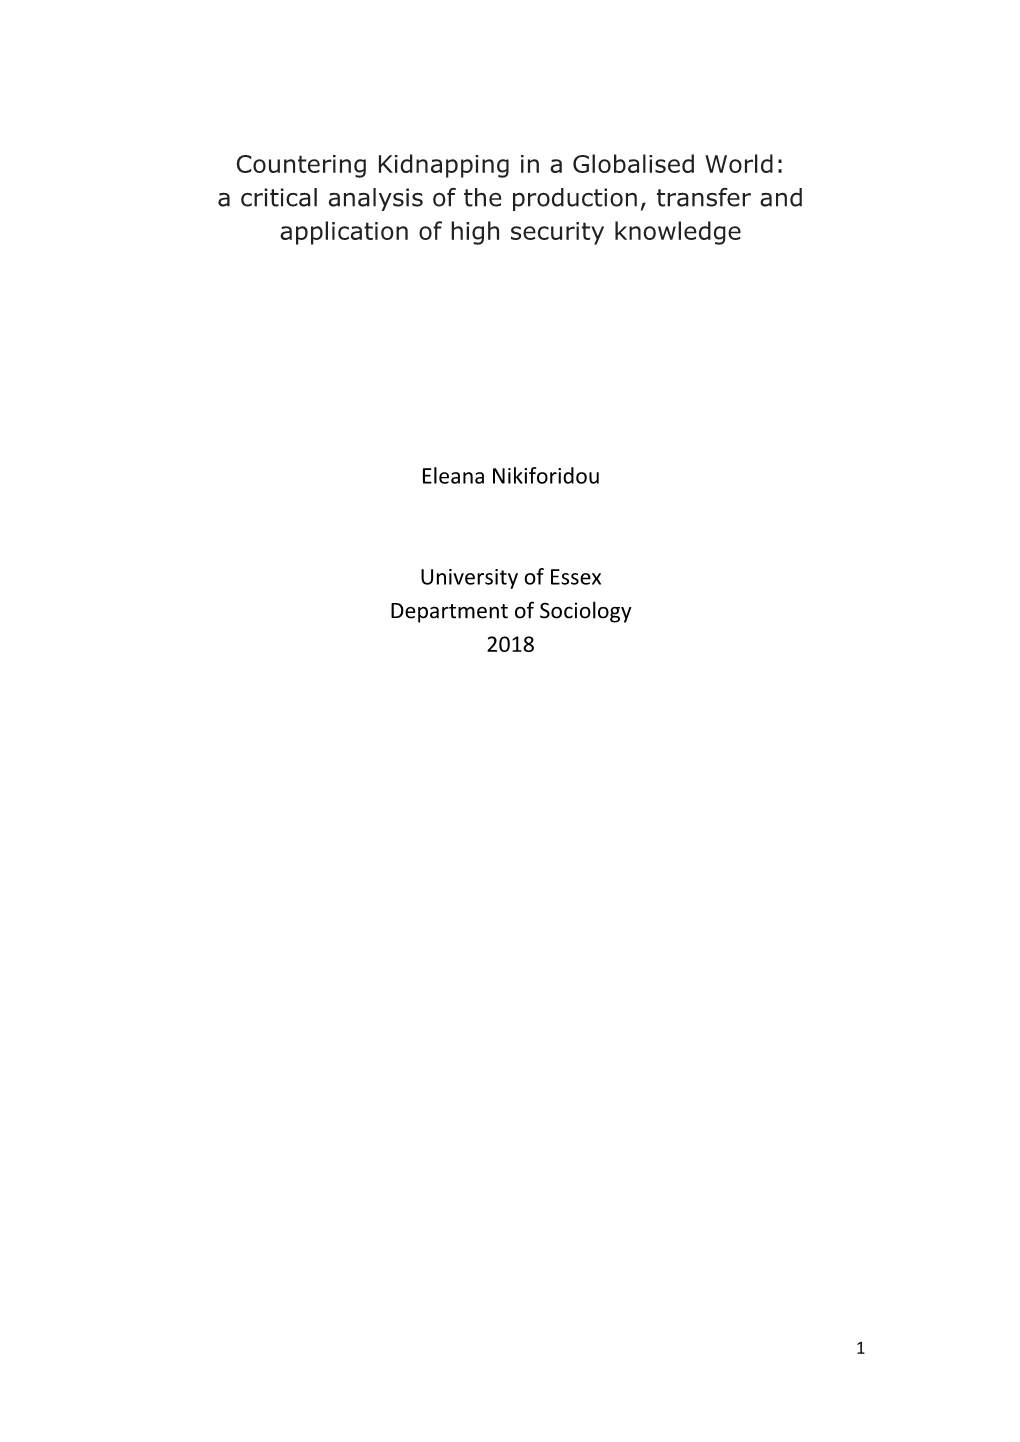 Countering Kidnapping in a Globalised World: a Critical Analysis of the Production, Transfer and Application of High Security Knowledge